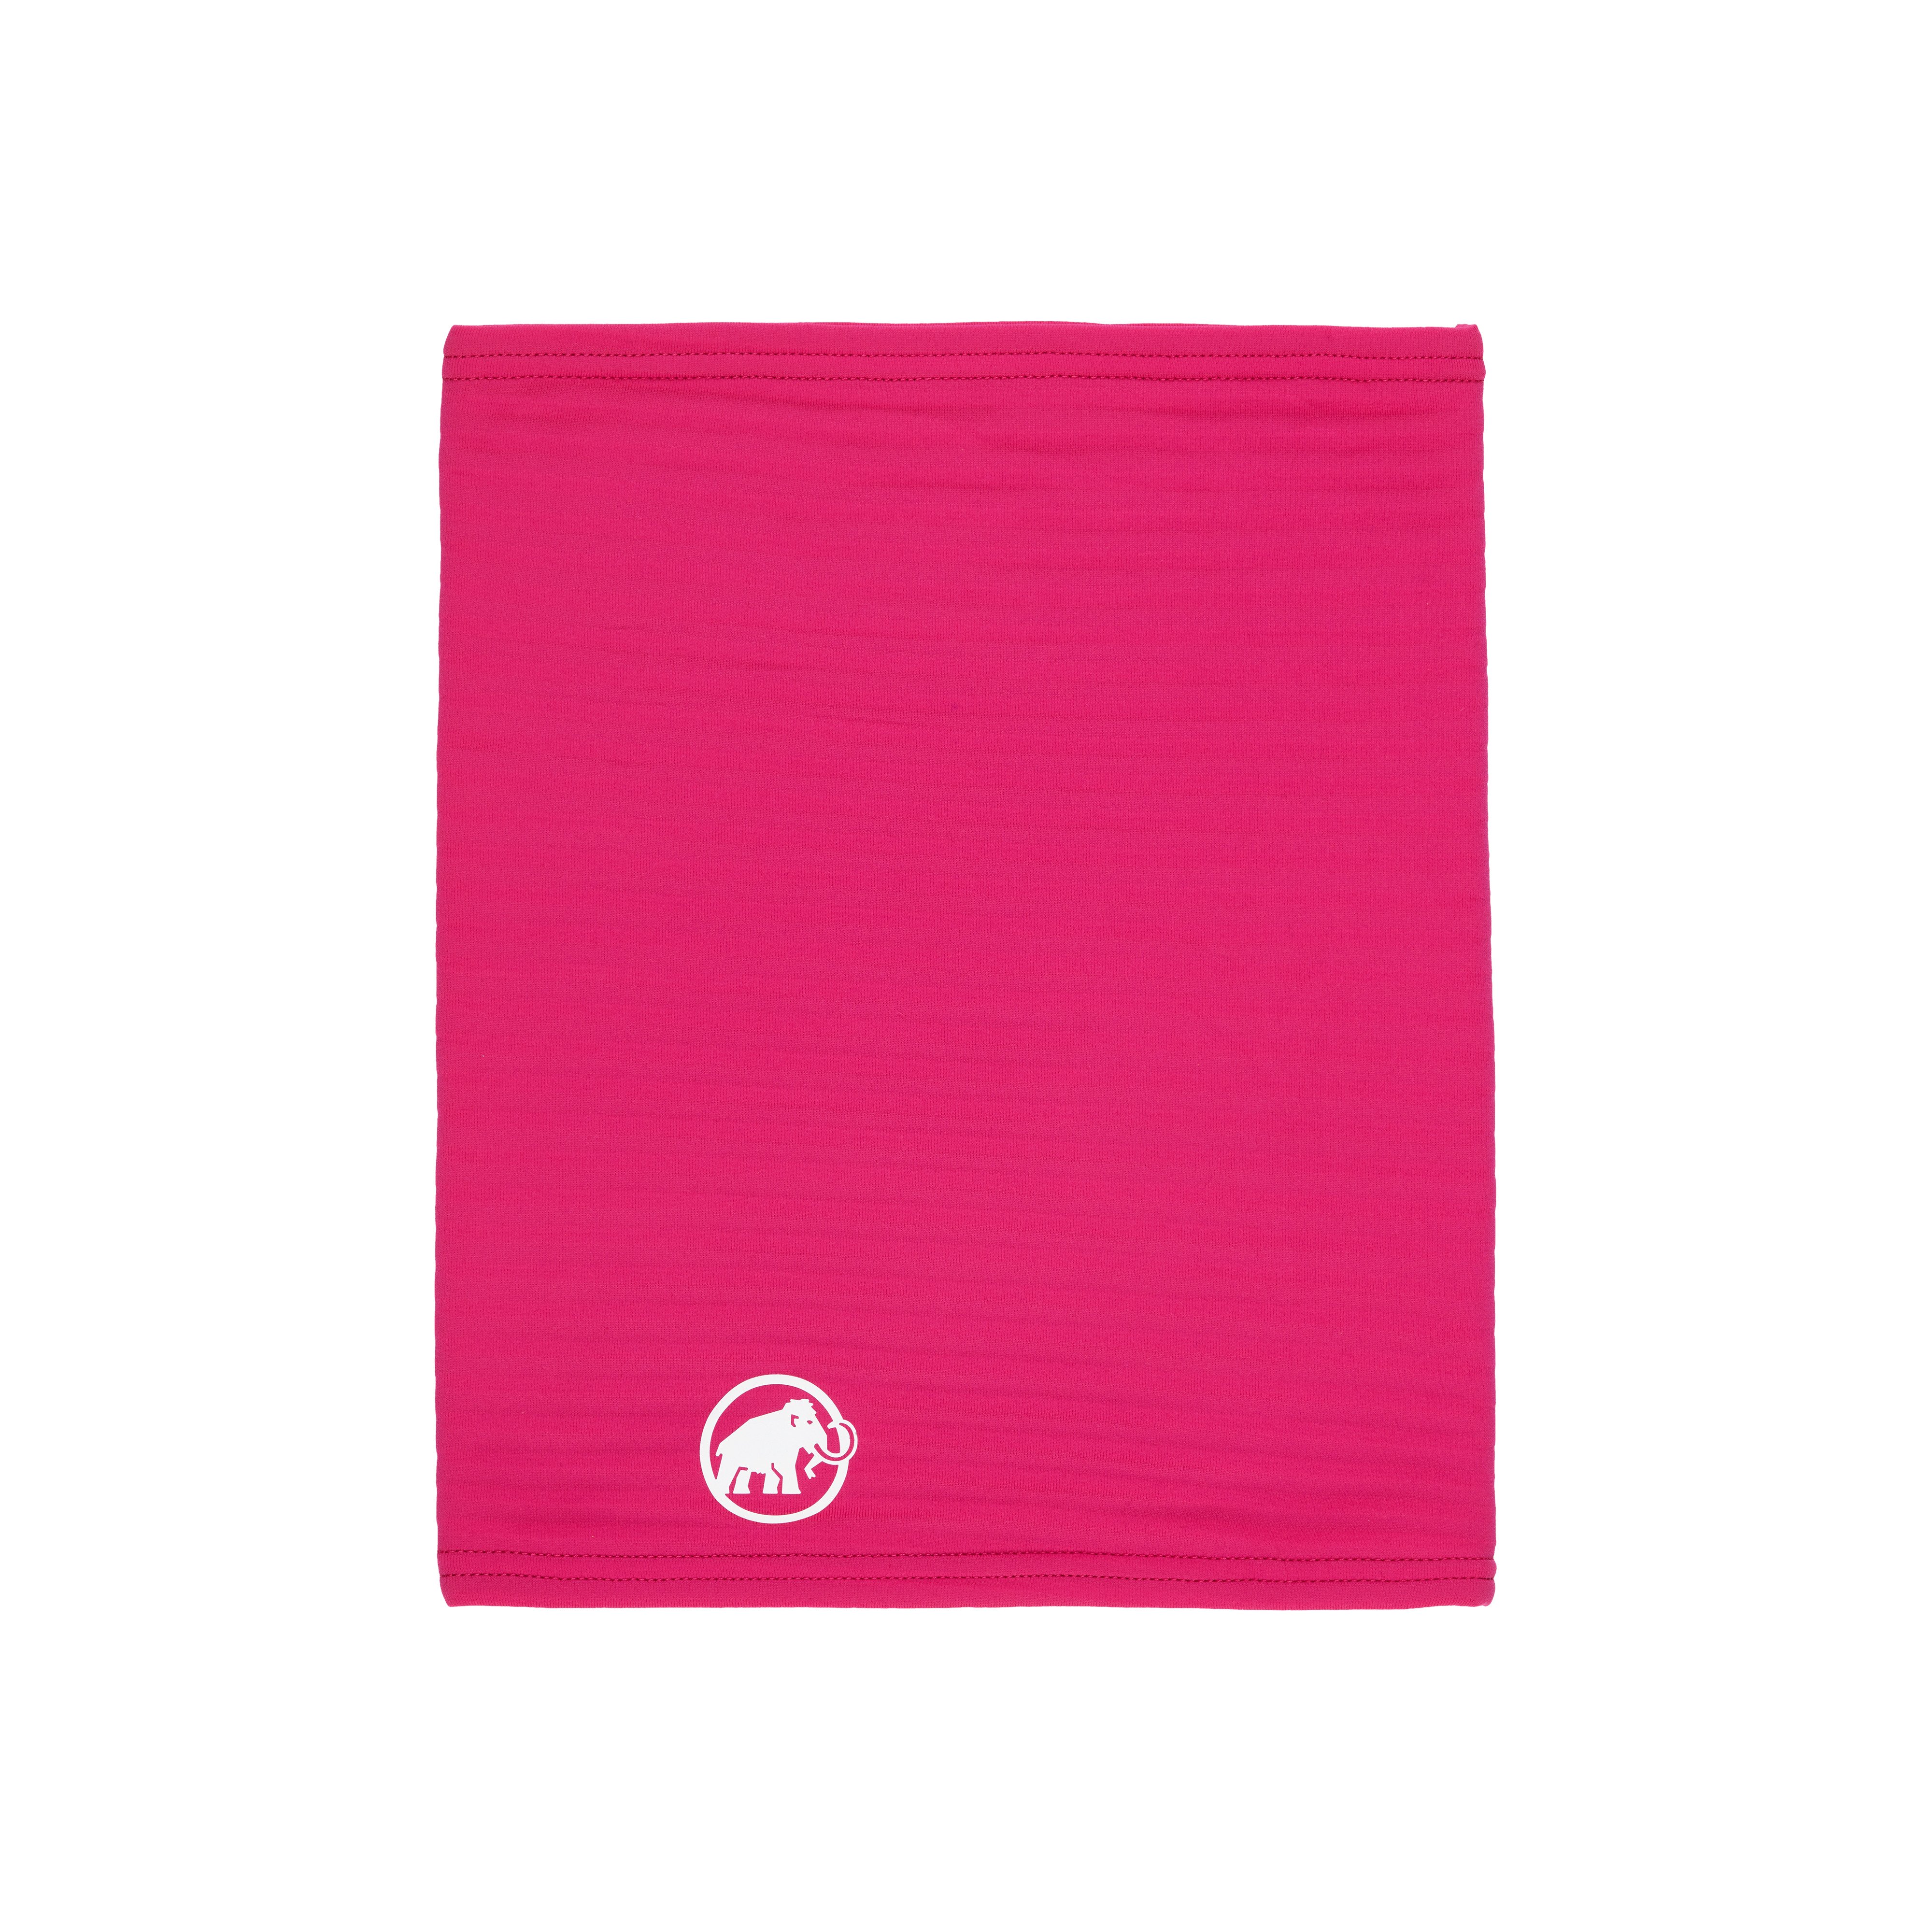 Taiss Light Neck Gaiter - pink, one size product image